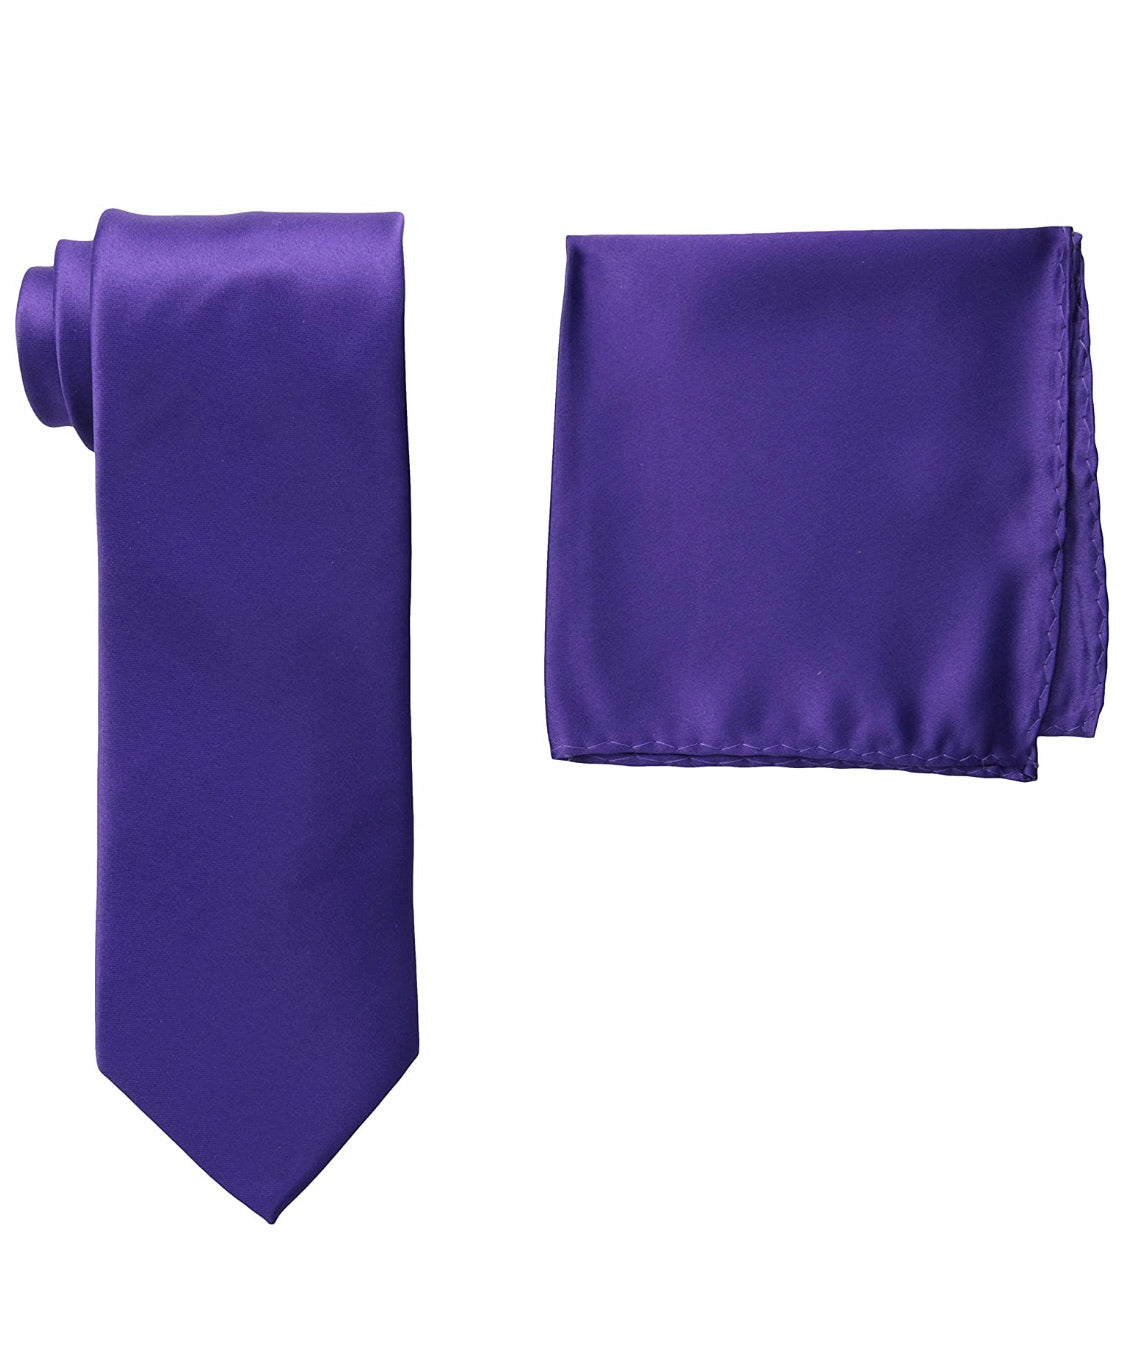 Stacy Adams Solid Purple Tie and Hanky - On Time Fashions Tuscaloosa